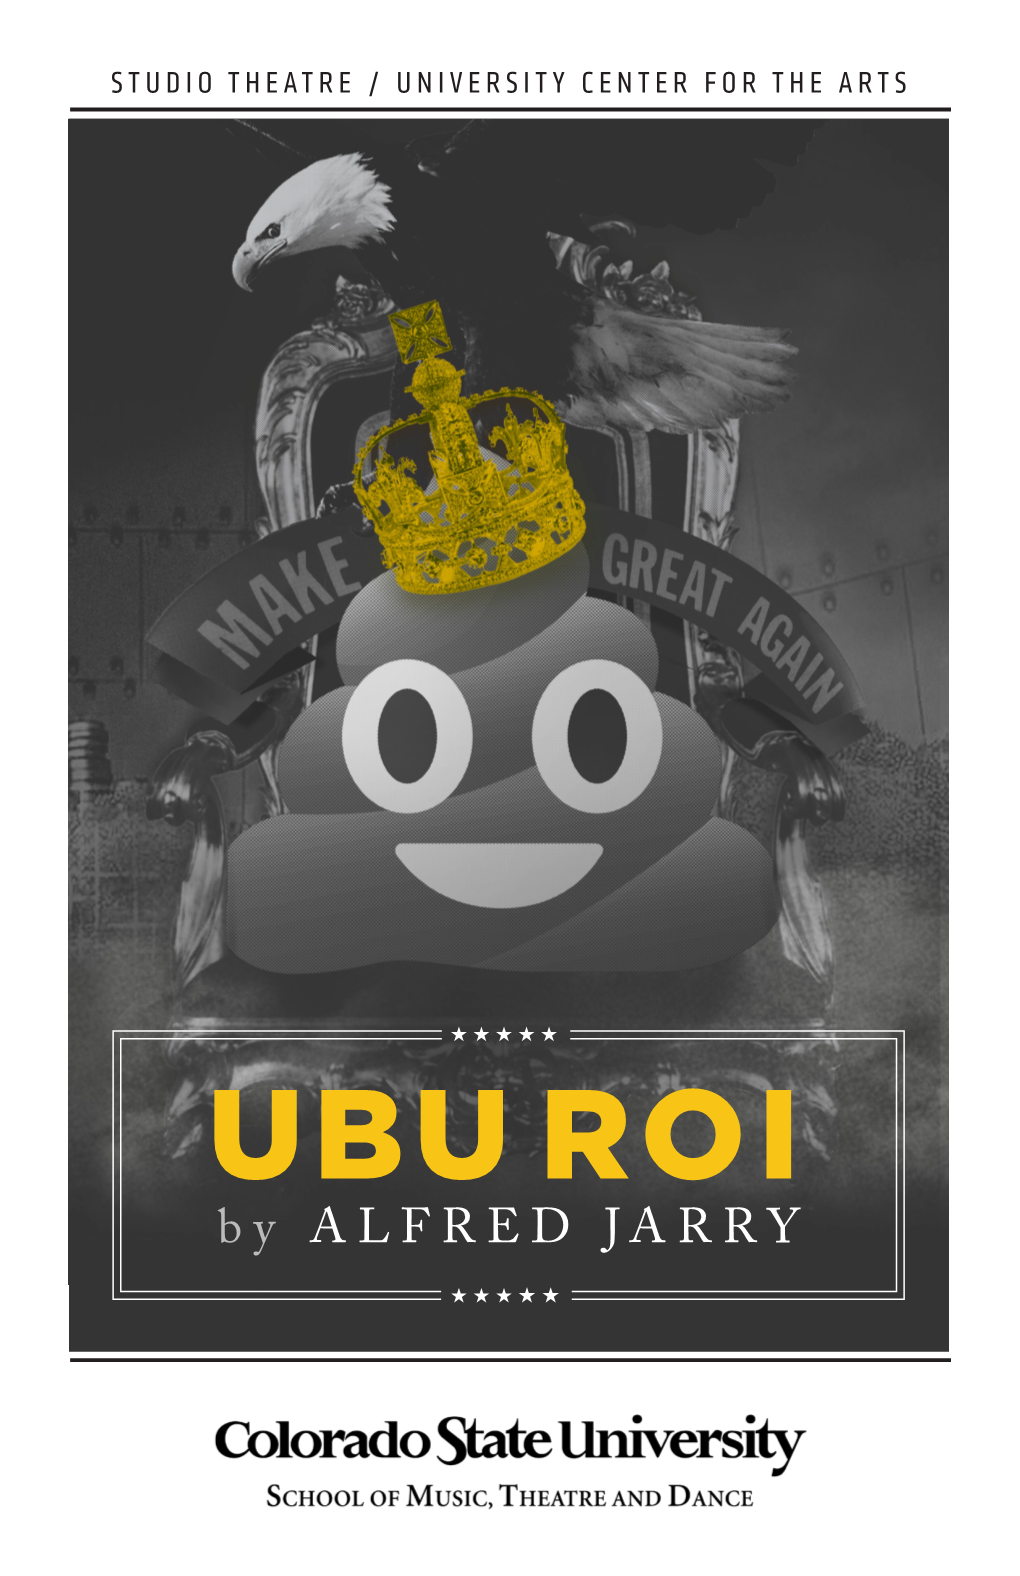 UBU ROI by ALFRED JARRY ★ ★ ★ ★ ★ the PRODUCTION YOU ARE ABOUT to SEE IS BOUND to OFFEND YOU